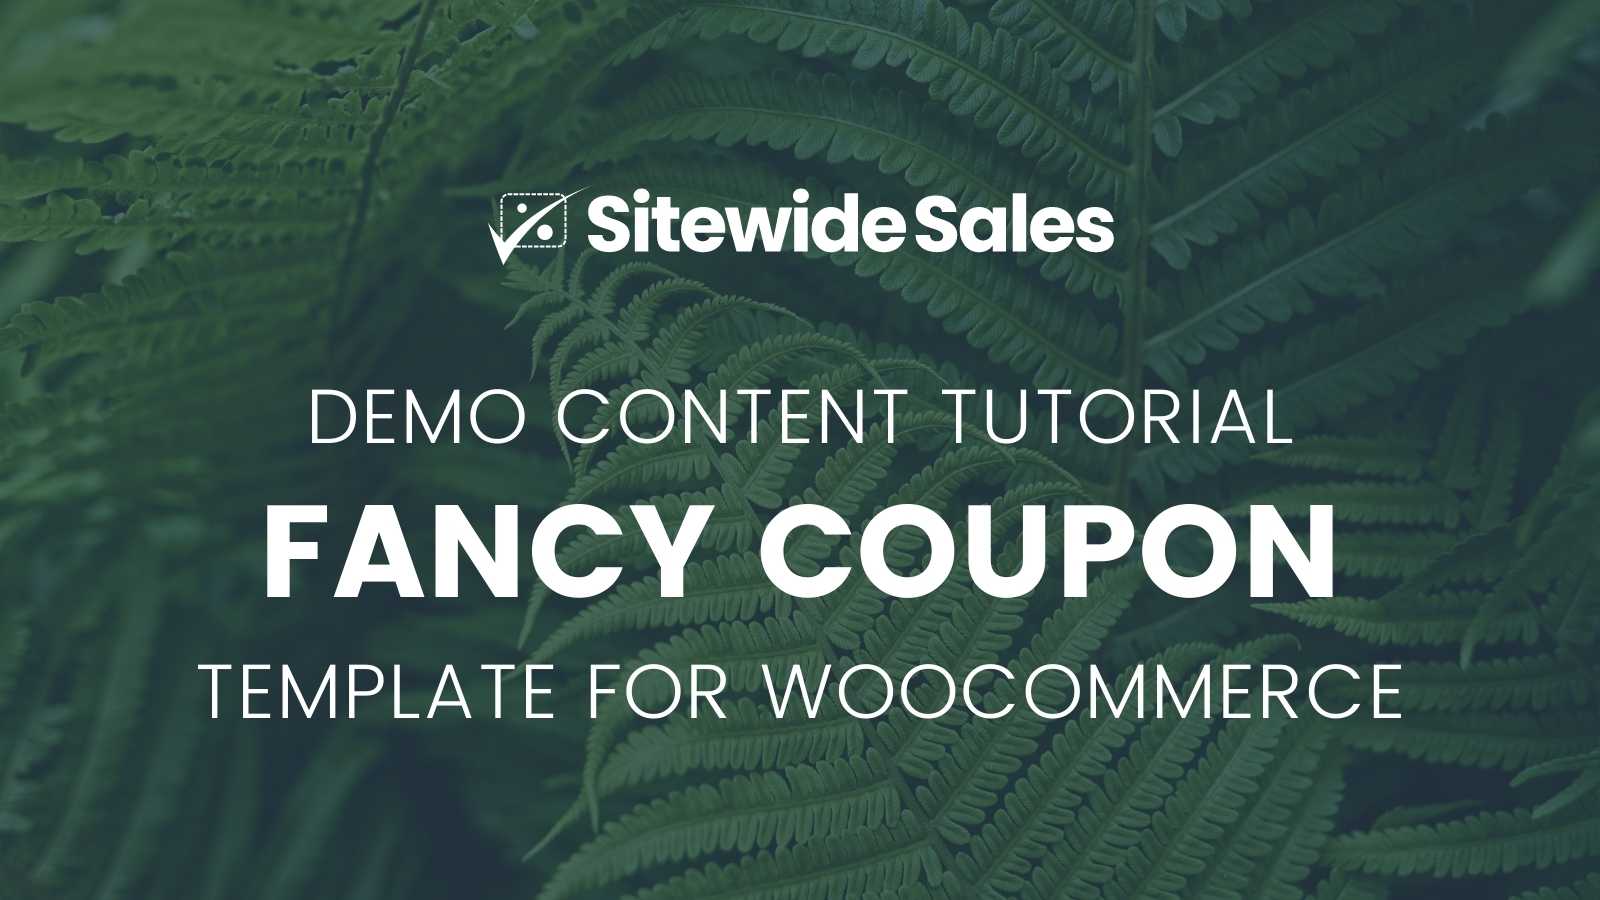 Fancy Coupon Template for WooCommerce: Sitewide Sale Demo Content